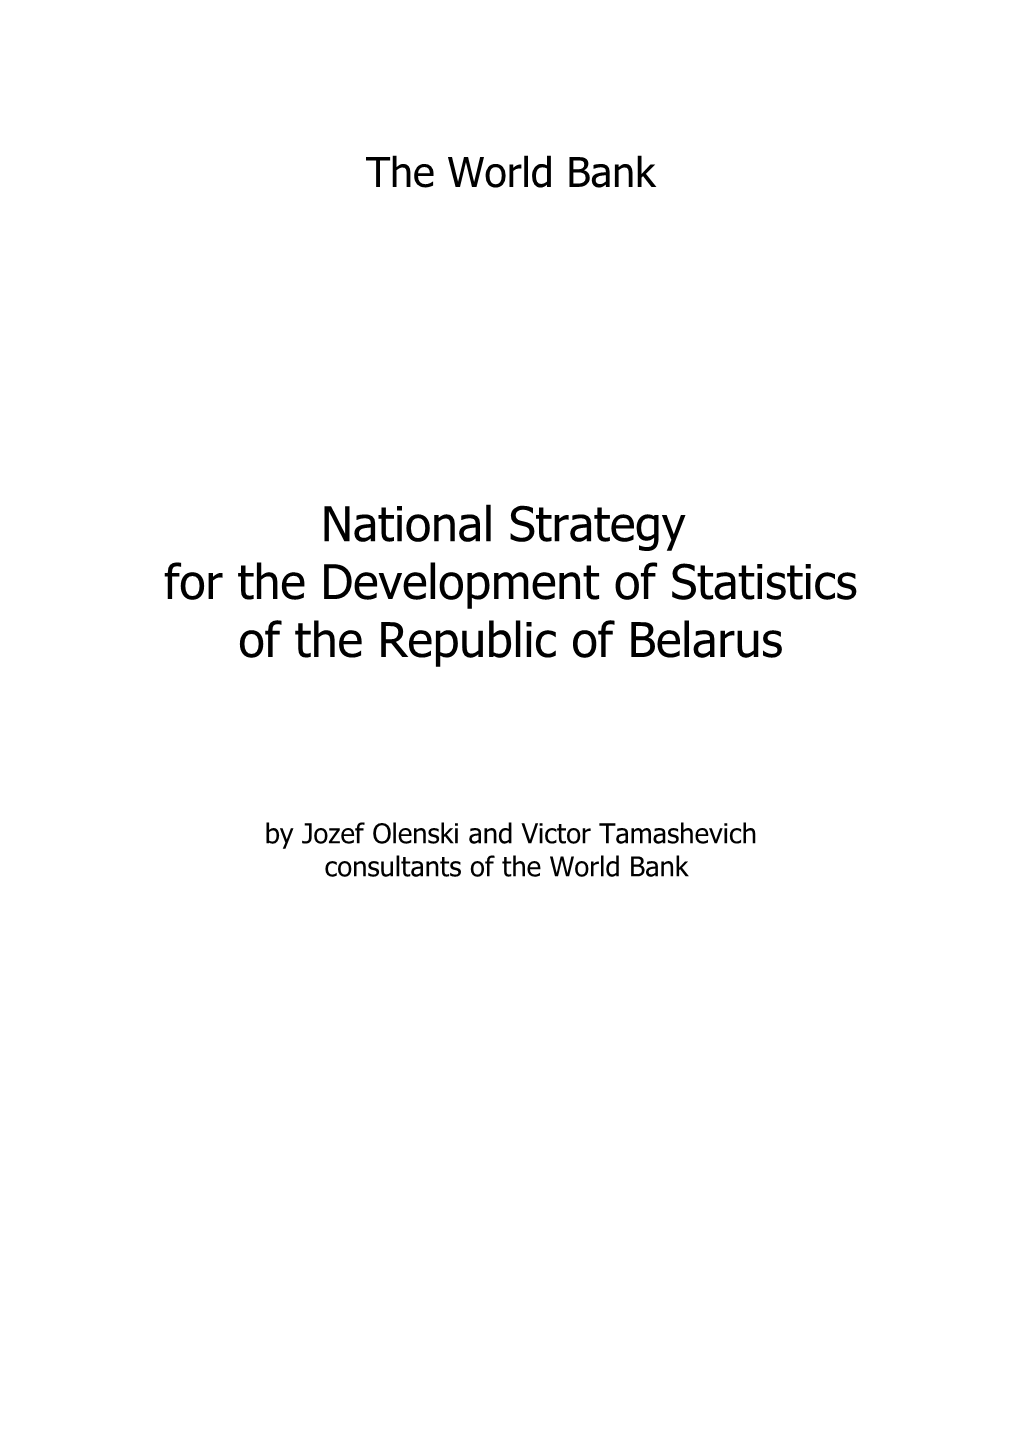 National Strategy for The